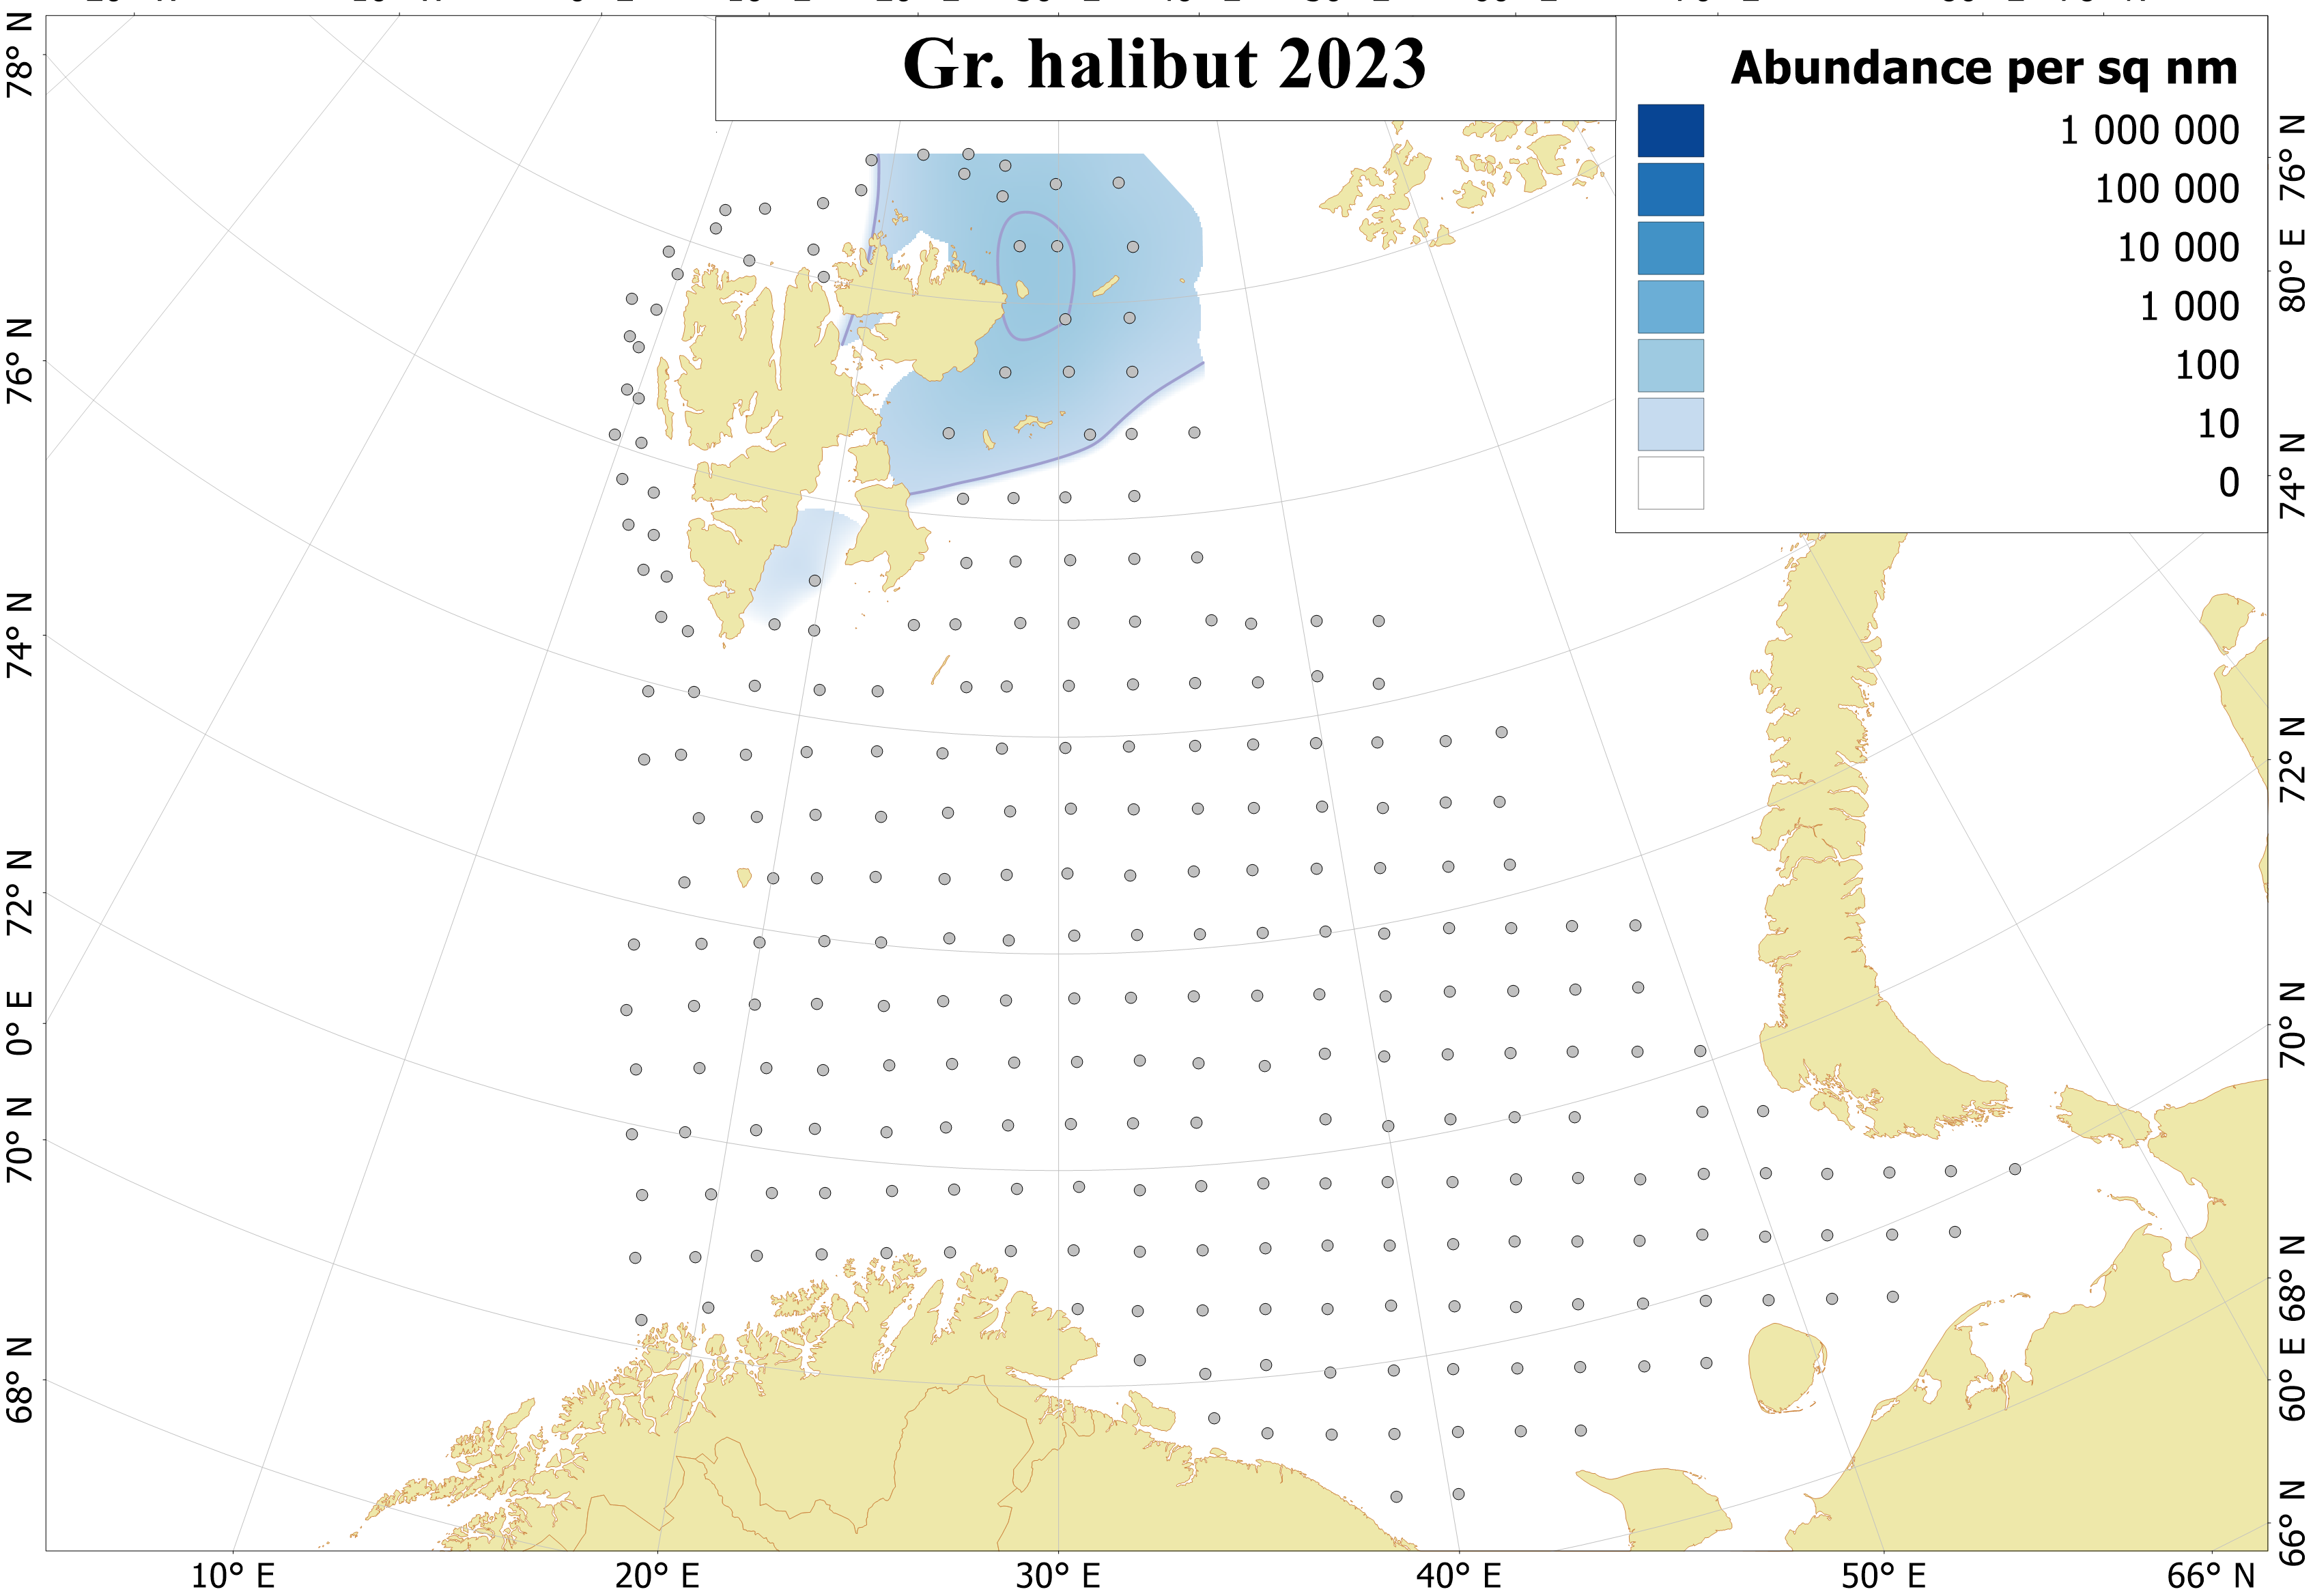 Figure 6.8.1. Distribution of 0-group Greenland halibut, August-September 2023. Dots indicate sampling locations. Abundance not corrected for capture efficiency.